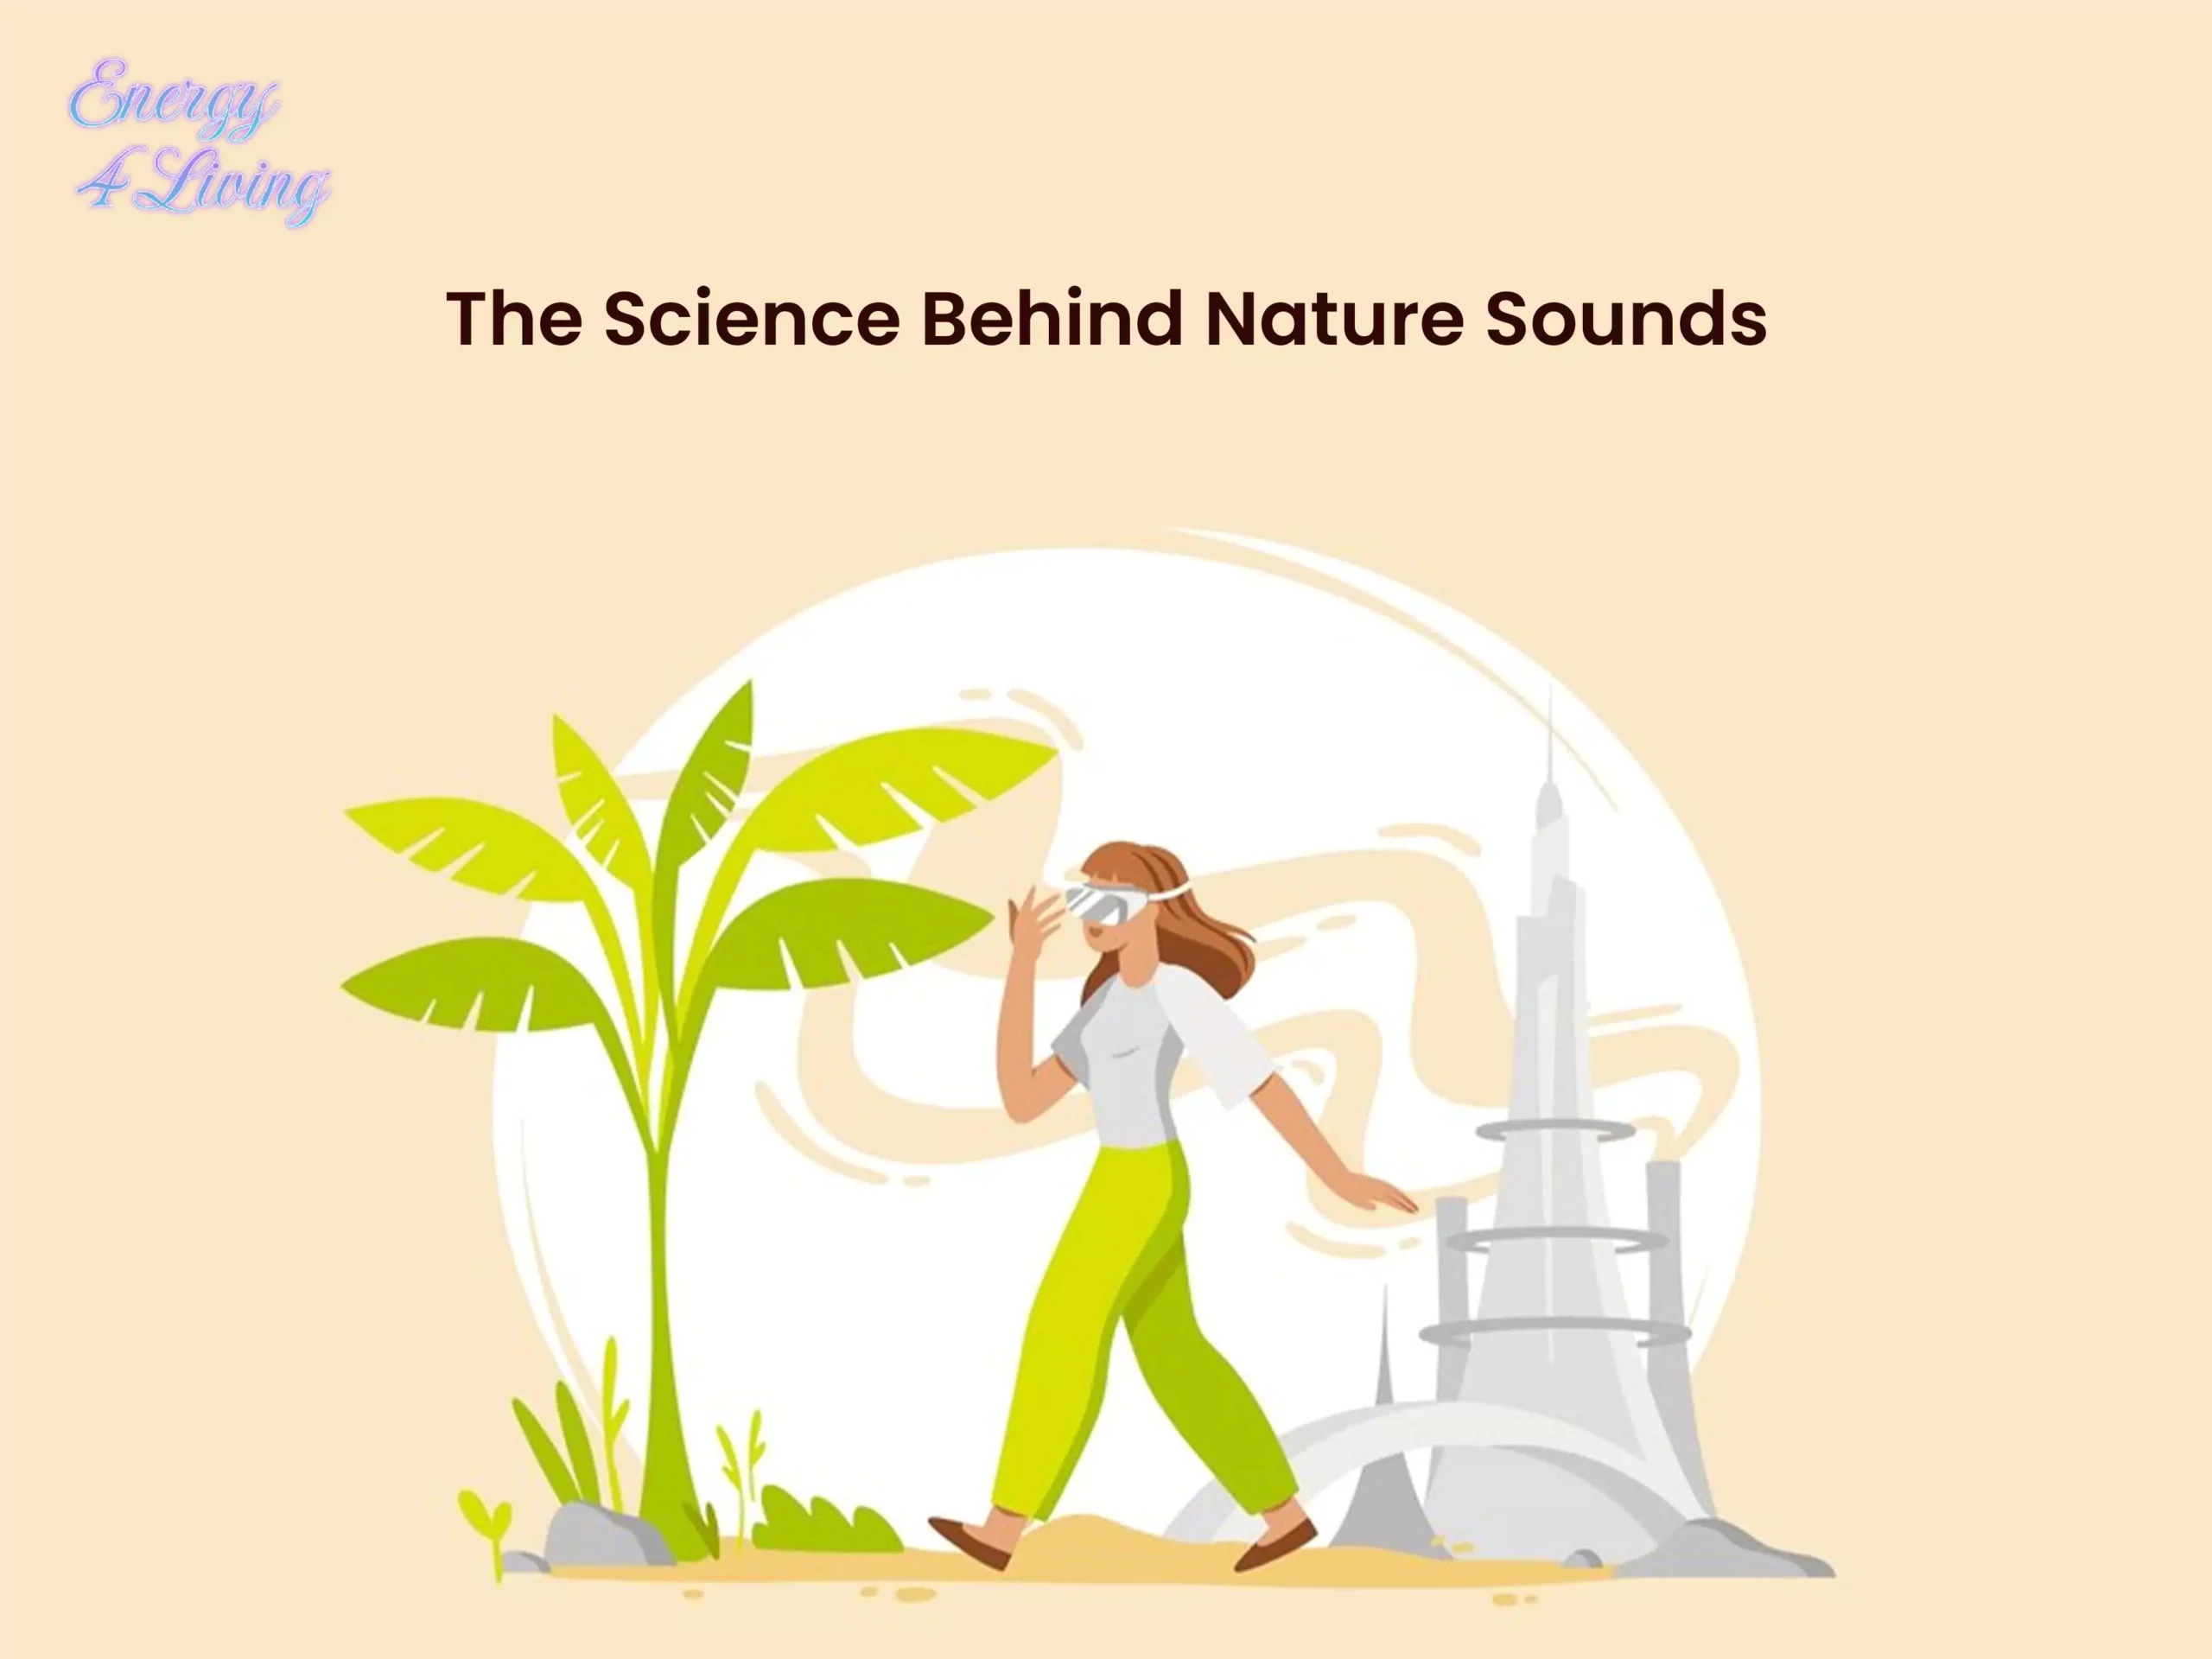 The Science Behind Nature Sounds